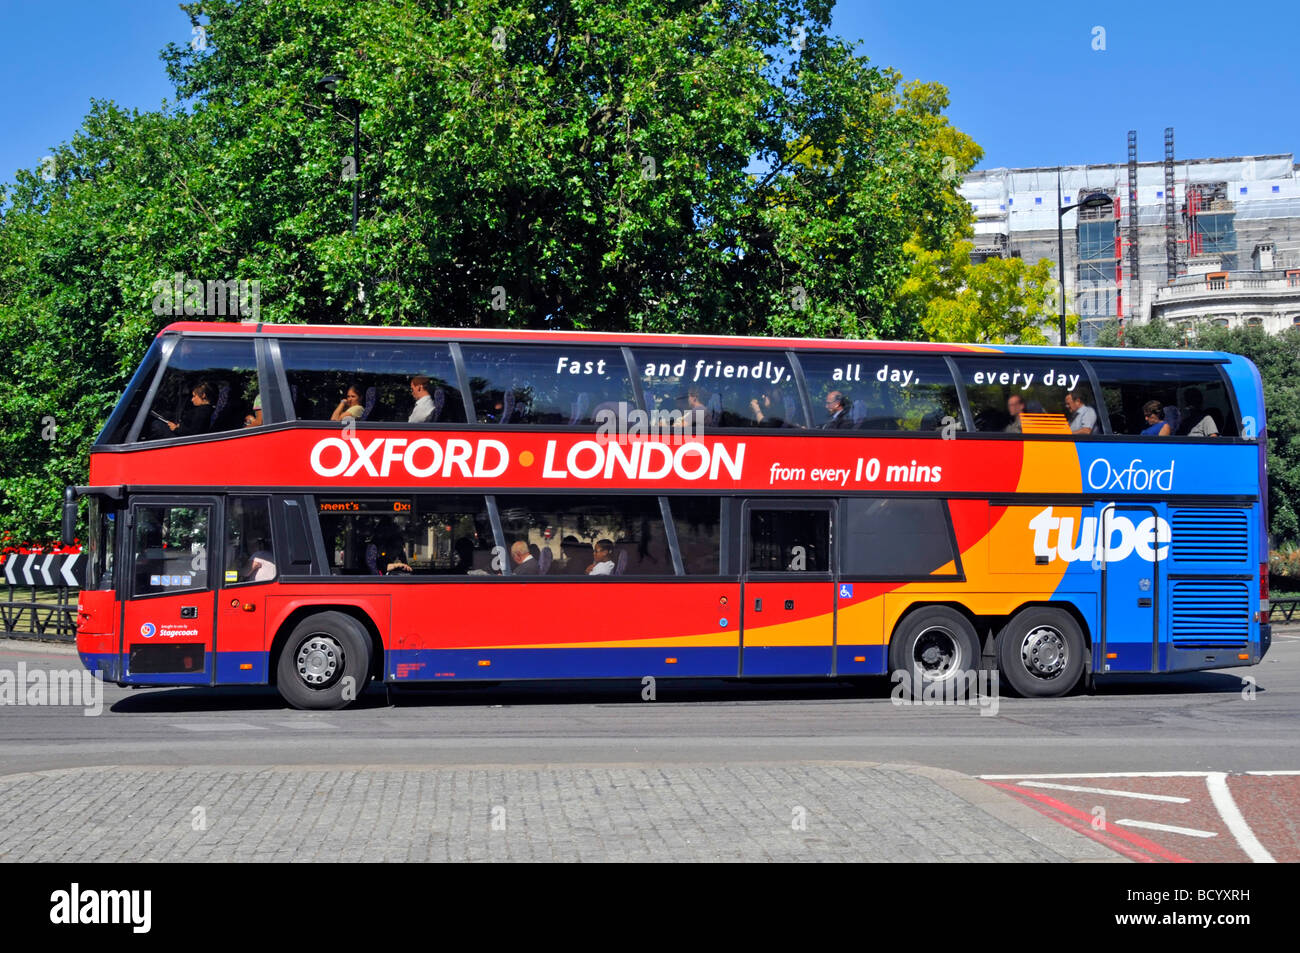 Stagecoach bus companies Oxford to London express tube service ...